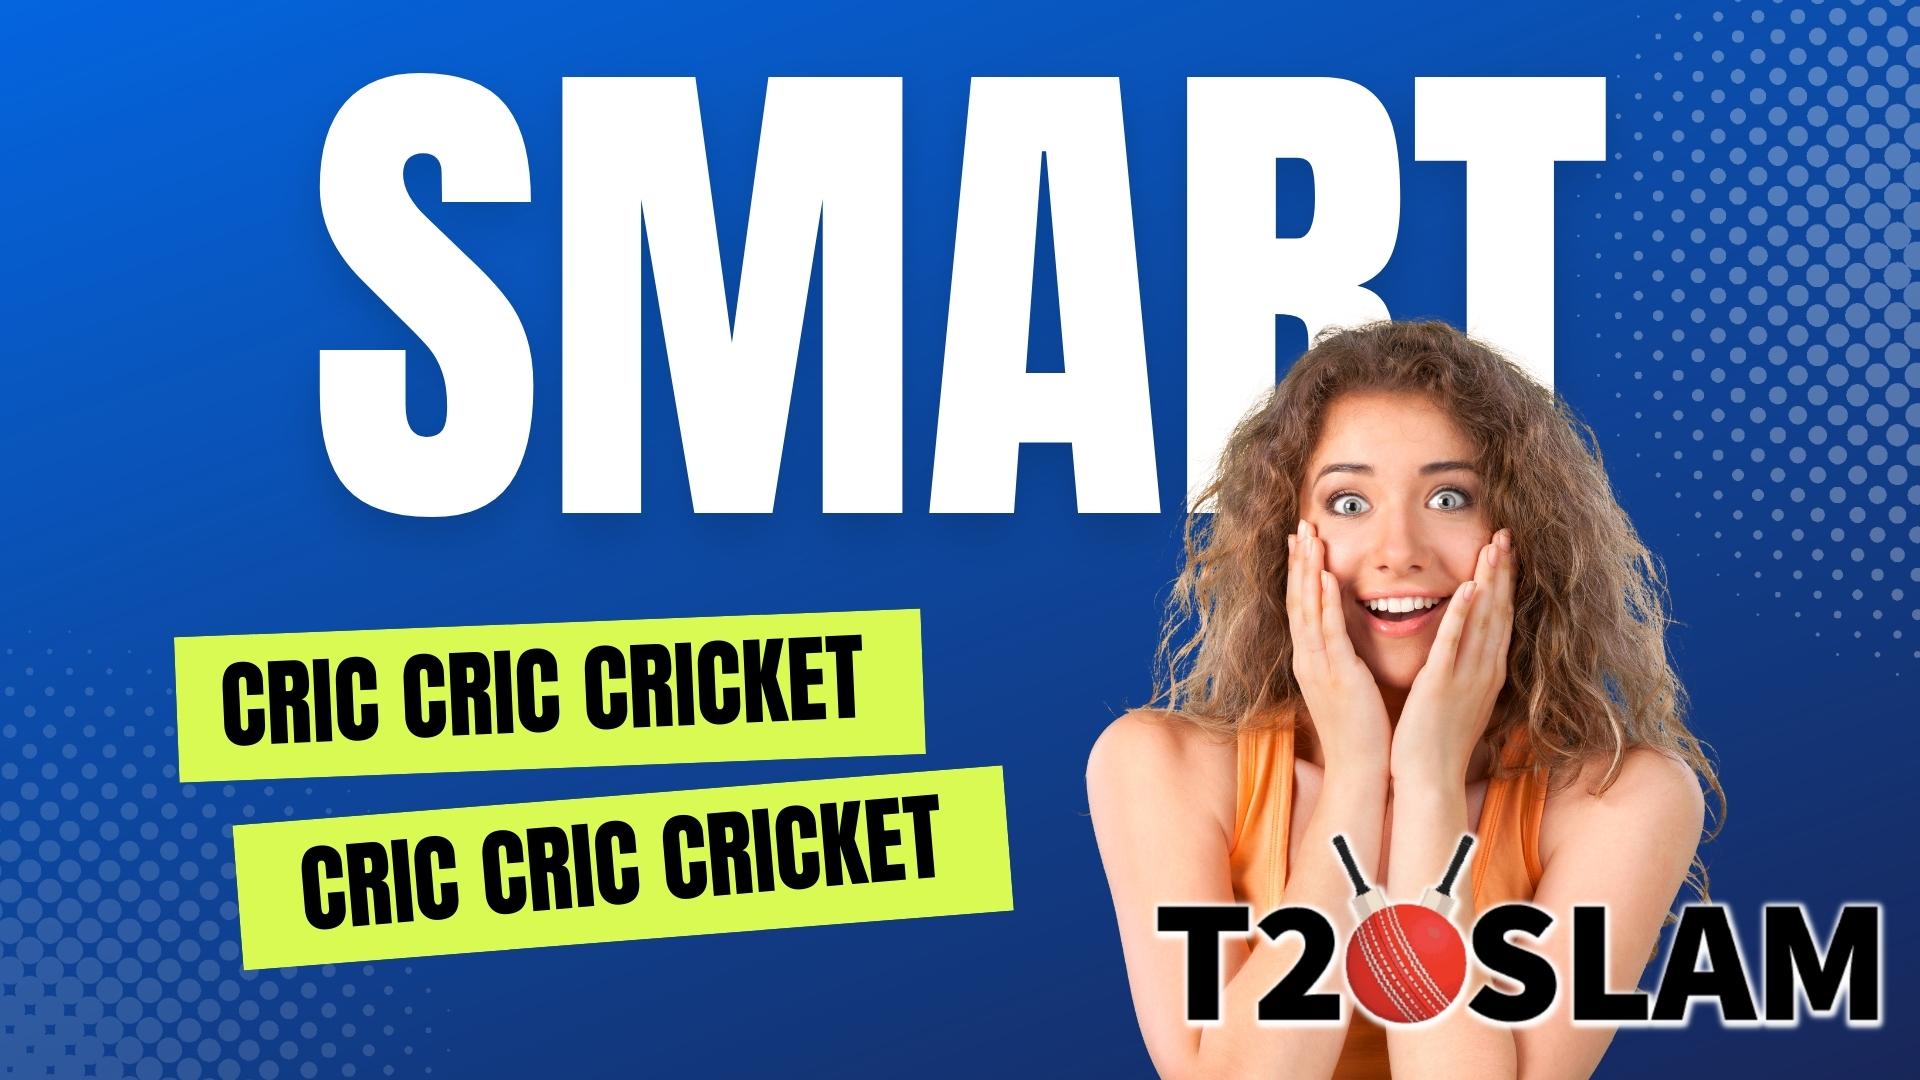 Smartcric T20 World Cup 2022 Live Streaming FREE on Smartcric.com